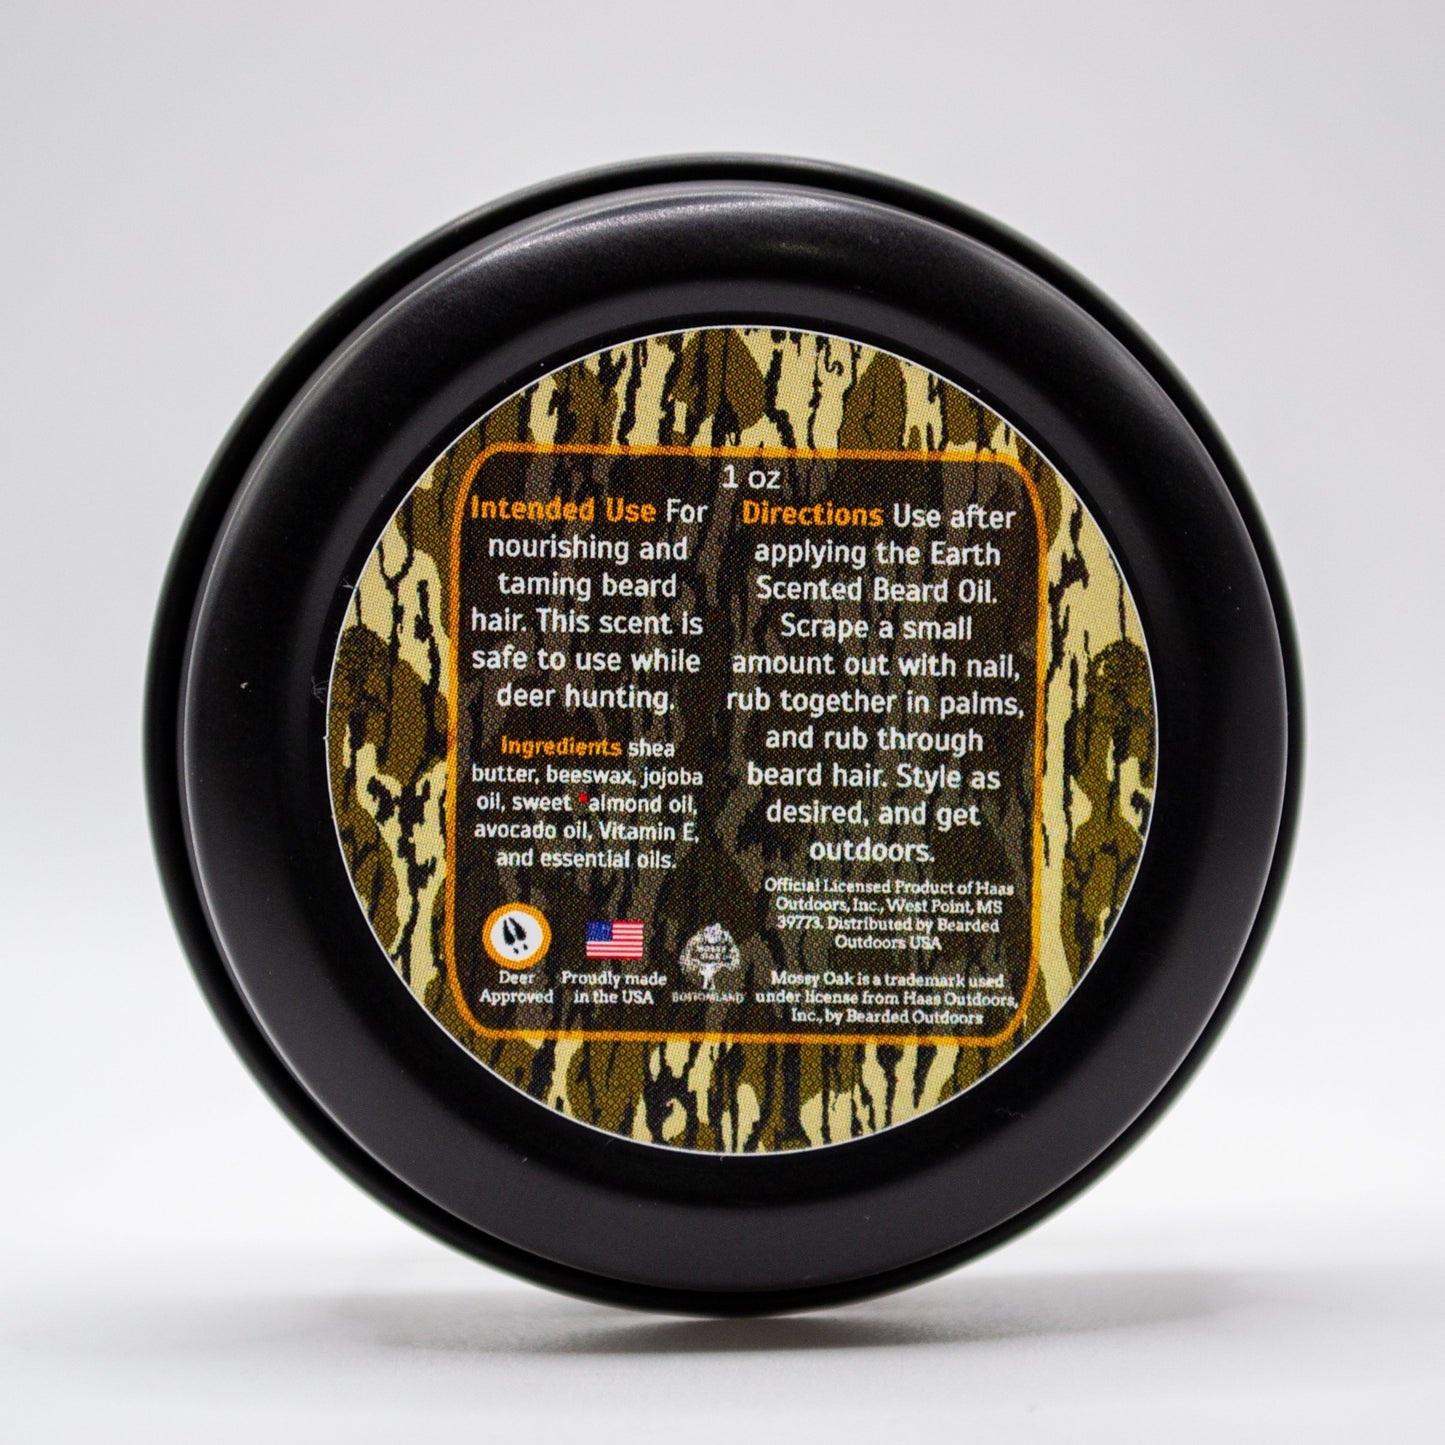 Mossy Oak Premium Beard Balm wrapped in Bottomland Camo by Bearded Outdoors